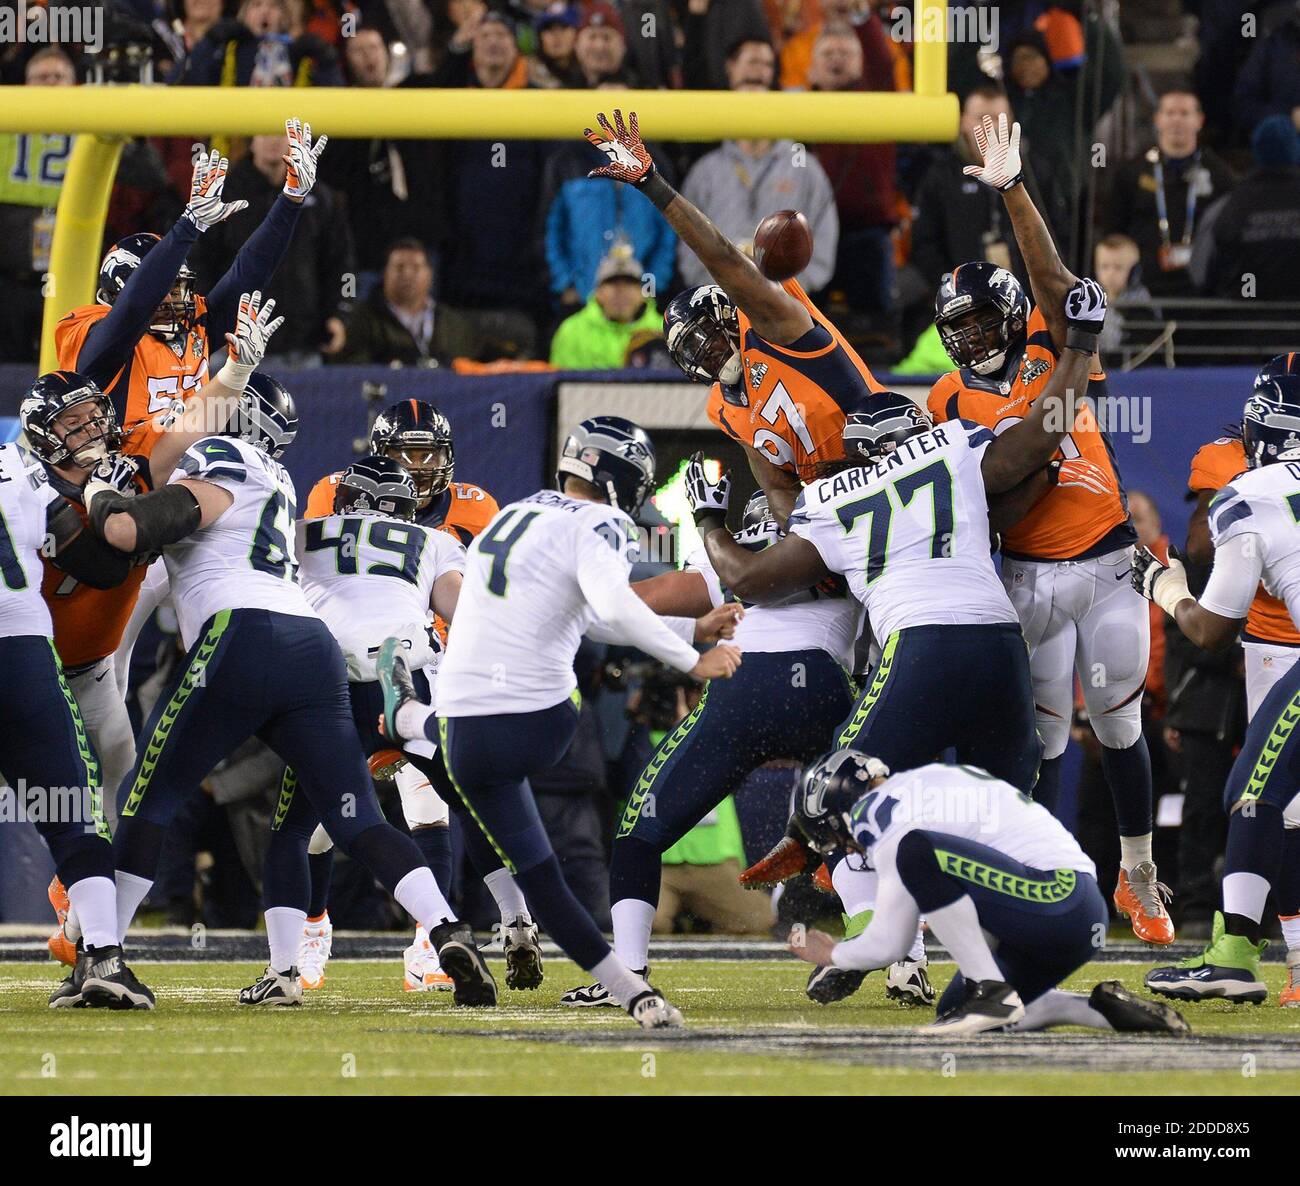 NO FILM, NO VIDEO, NO TV, NO DOCUMENTARY - Seattle Seahawks kicker Steven Hauschka (4) converts a field goal during first-quarter action against the Denver Broncos in Super Bowl XLVIII at MetLife Stadium in East Rutherford, NJ, USA on Febriuary 2, 2014. Photo by J. Conrad Wiliams/Newsday/MCT/ABACAPRESS.COM Stock Photo